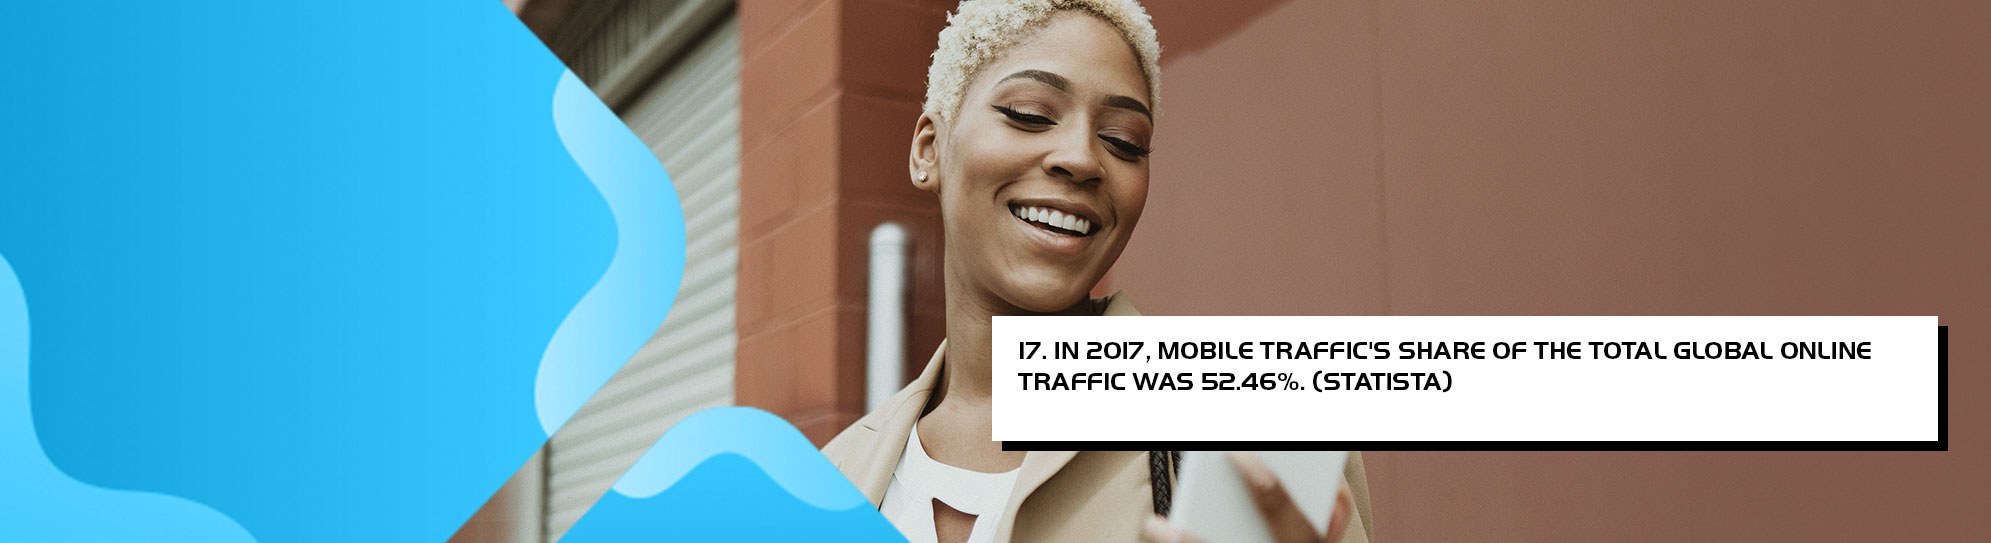 In 2017, mobile traffics share of the total global online traffic was 52.46 percent